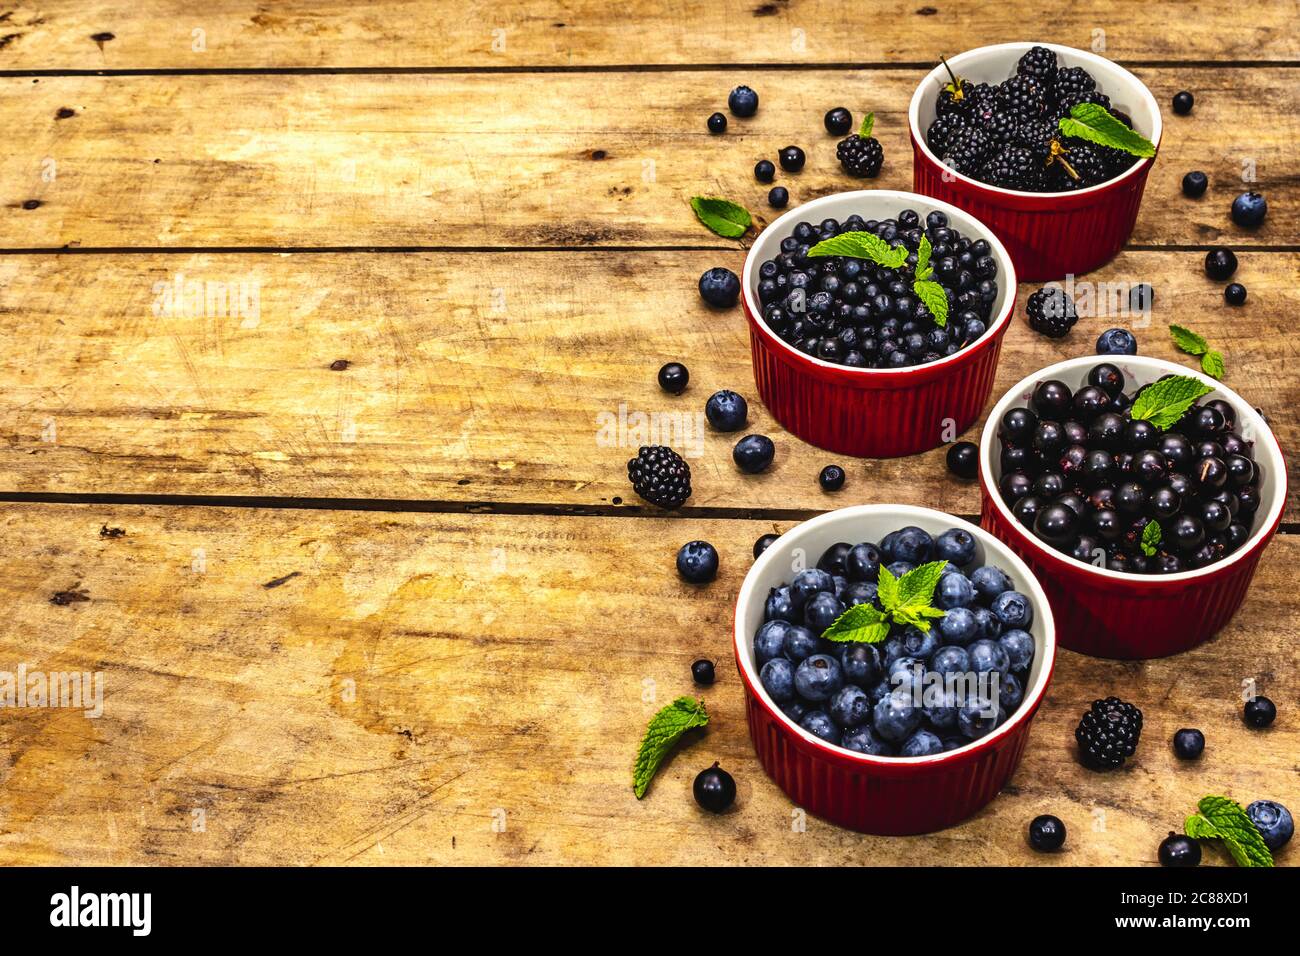 Assorted berries in blue and black colors: bilberry, blueberry, currant and blackberry. Old wooden table background, copy space Stock Photo